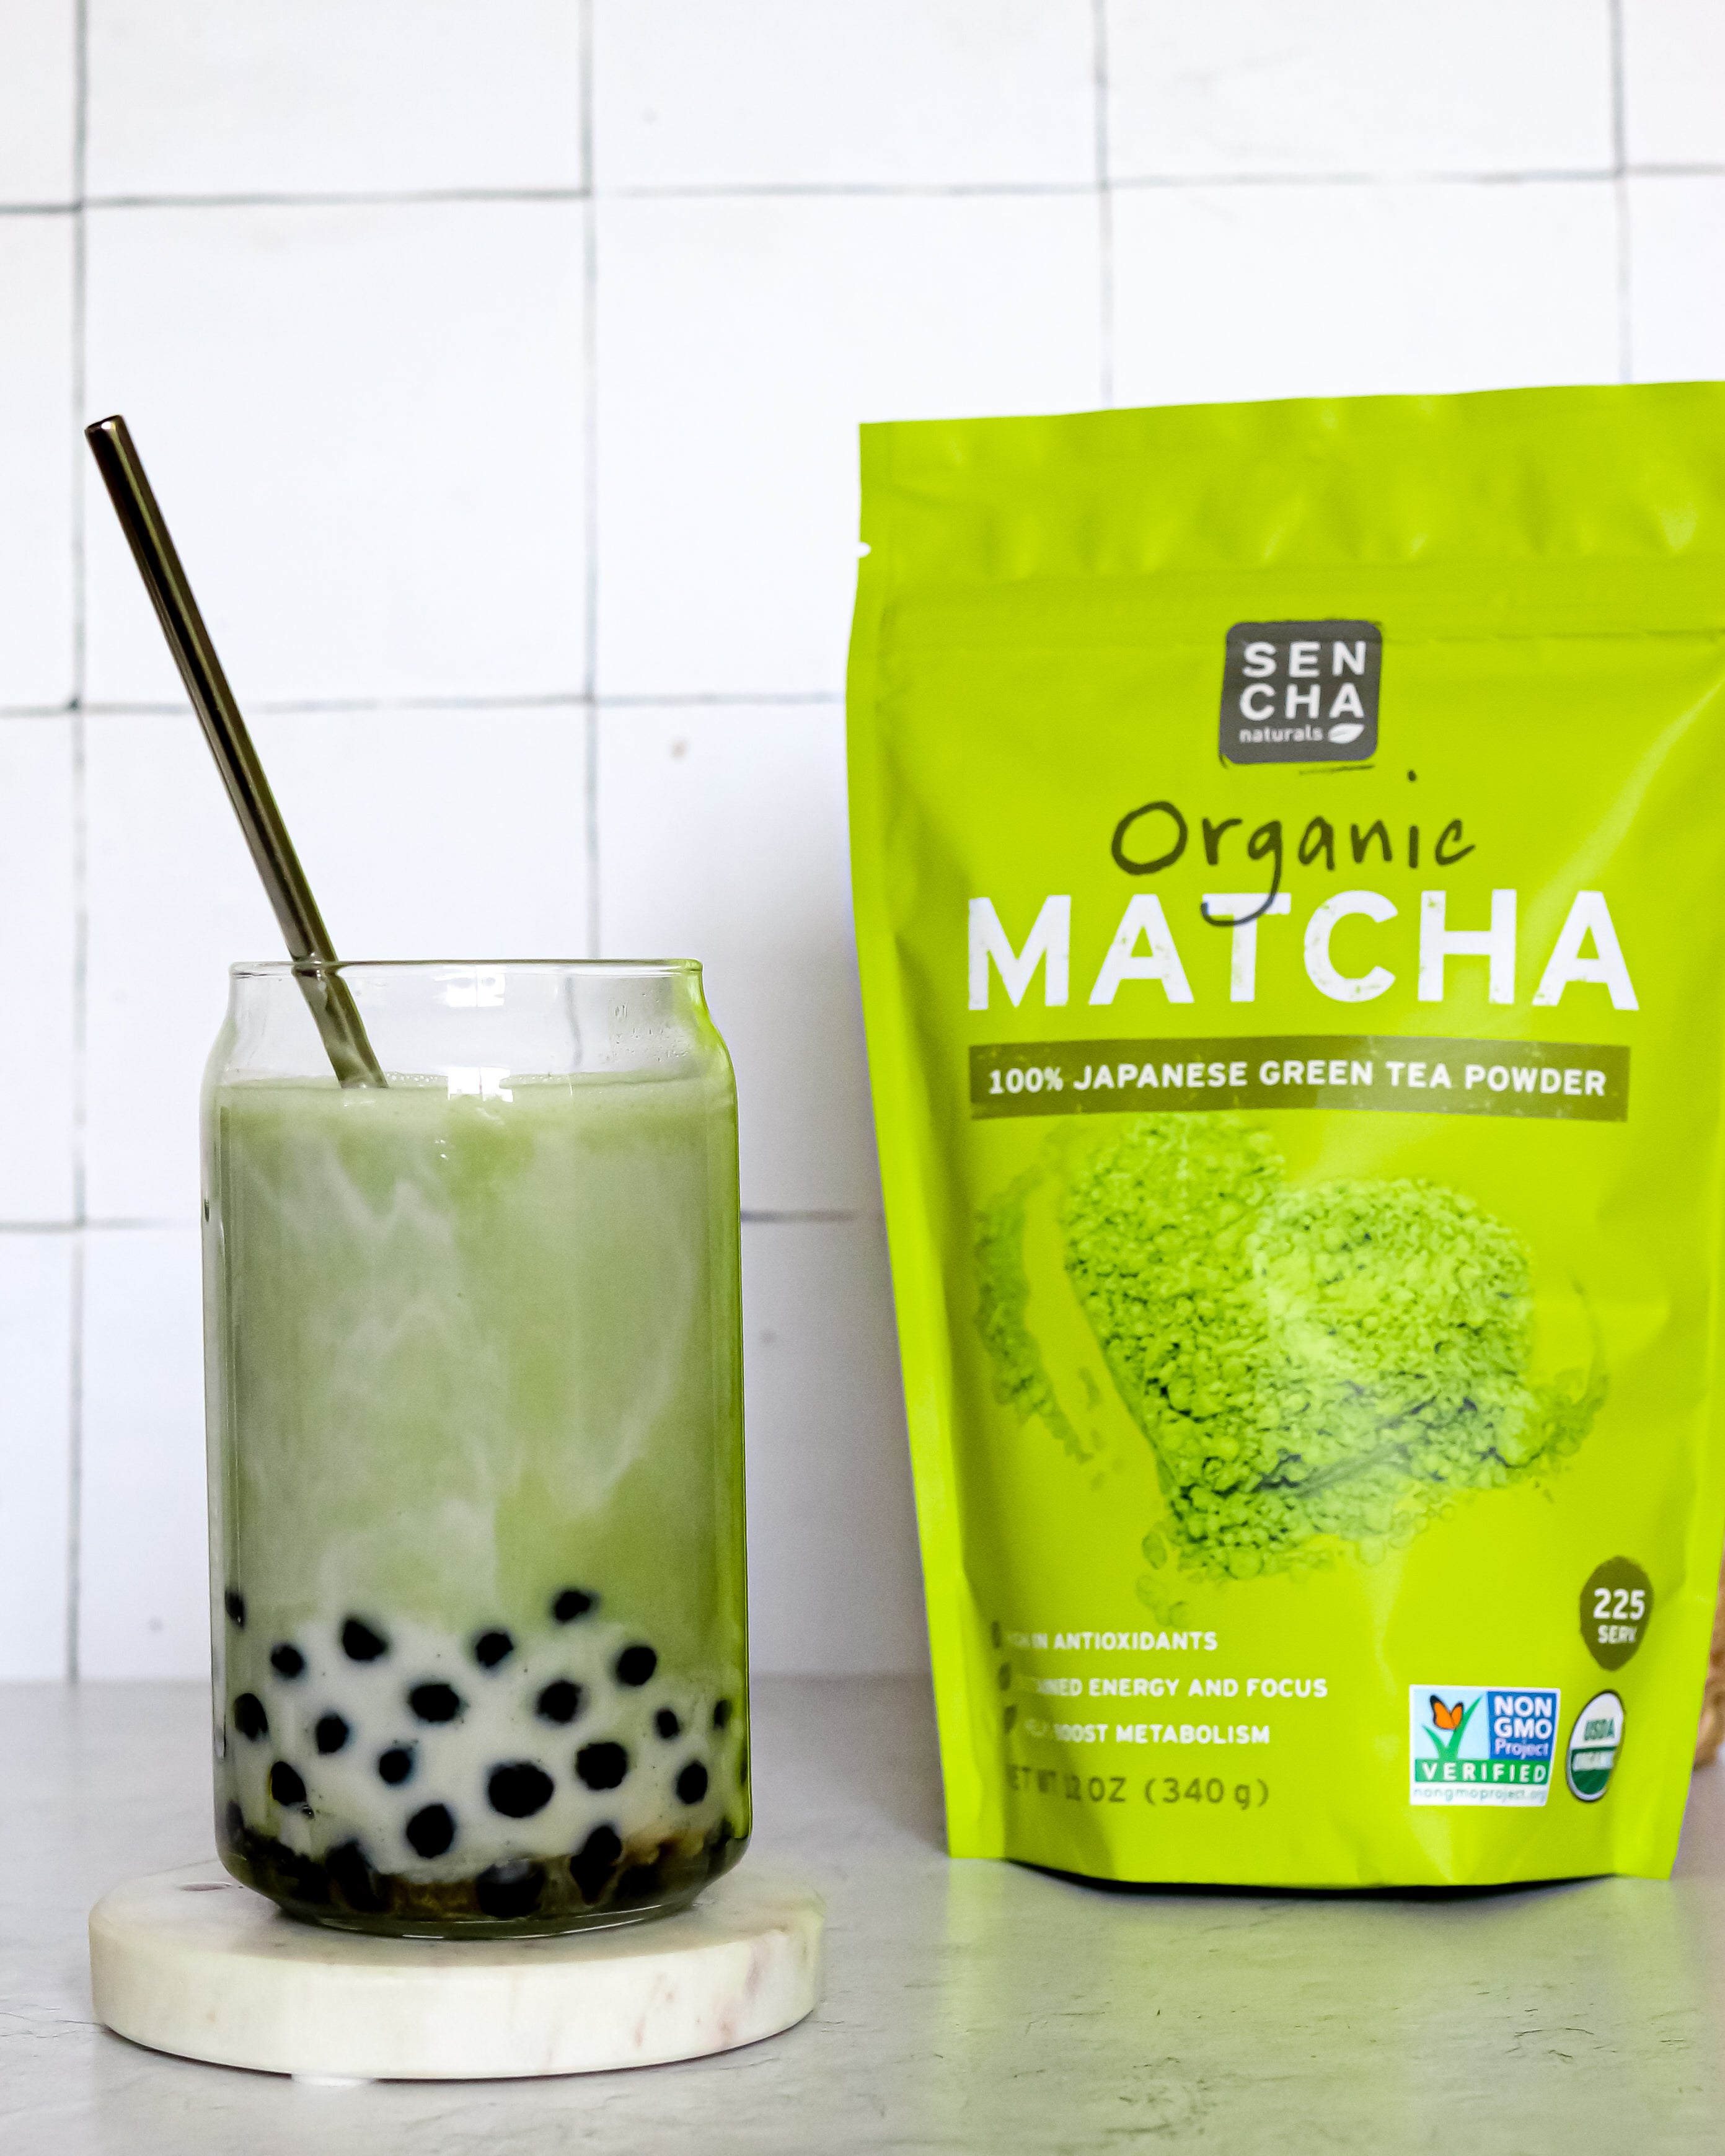 Photo of a bag of sencha naturals matcha green tea powder on the right, a clear glass of green tea boba bubble tea on the left with a silver straw inside, all on a white background